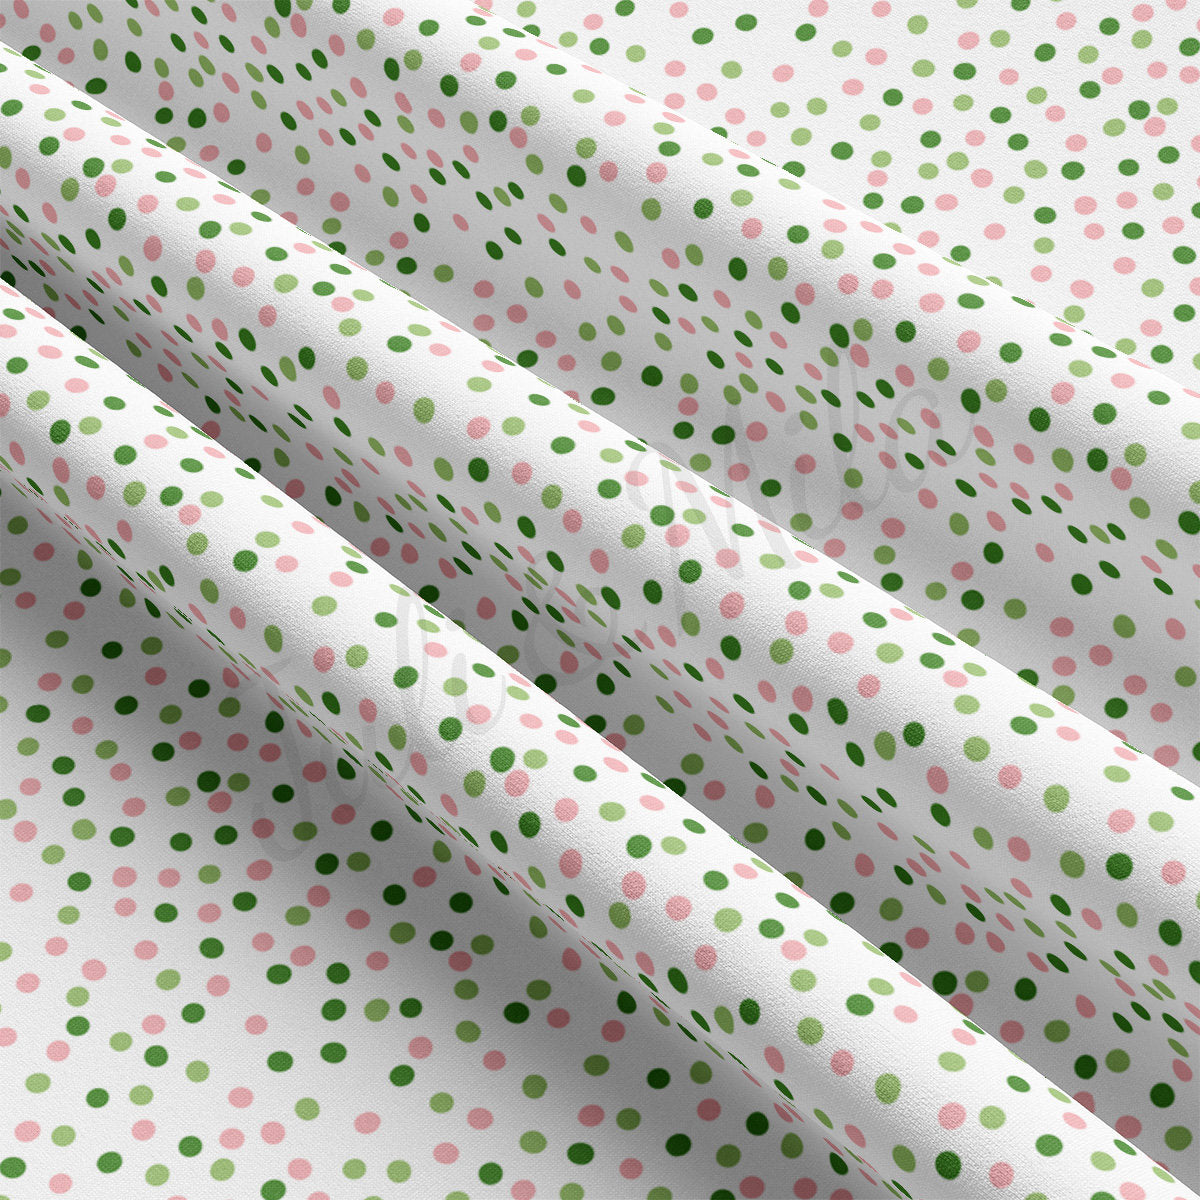 DBP Fabric Double Brushed Polyester DBP2435